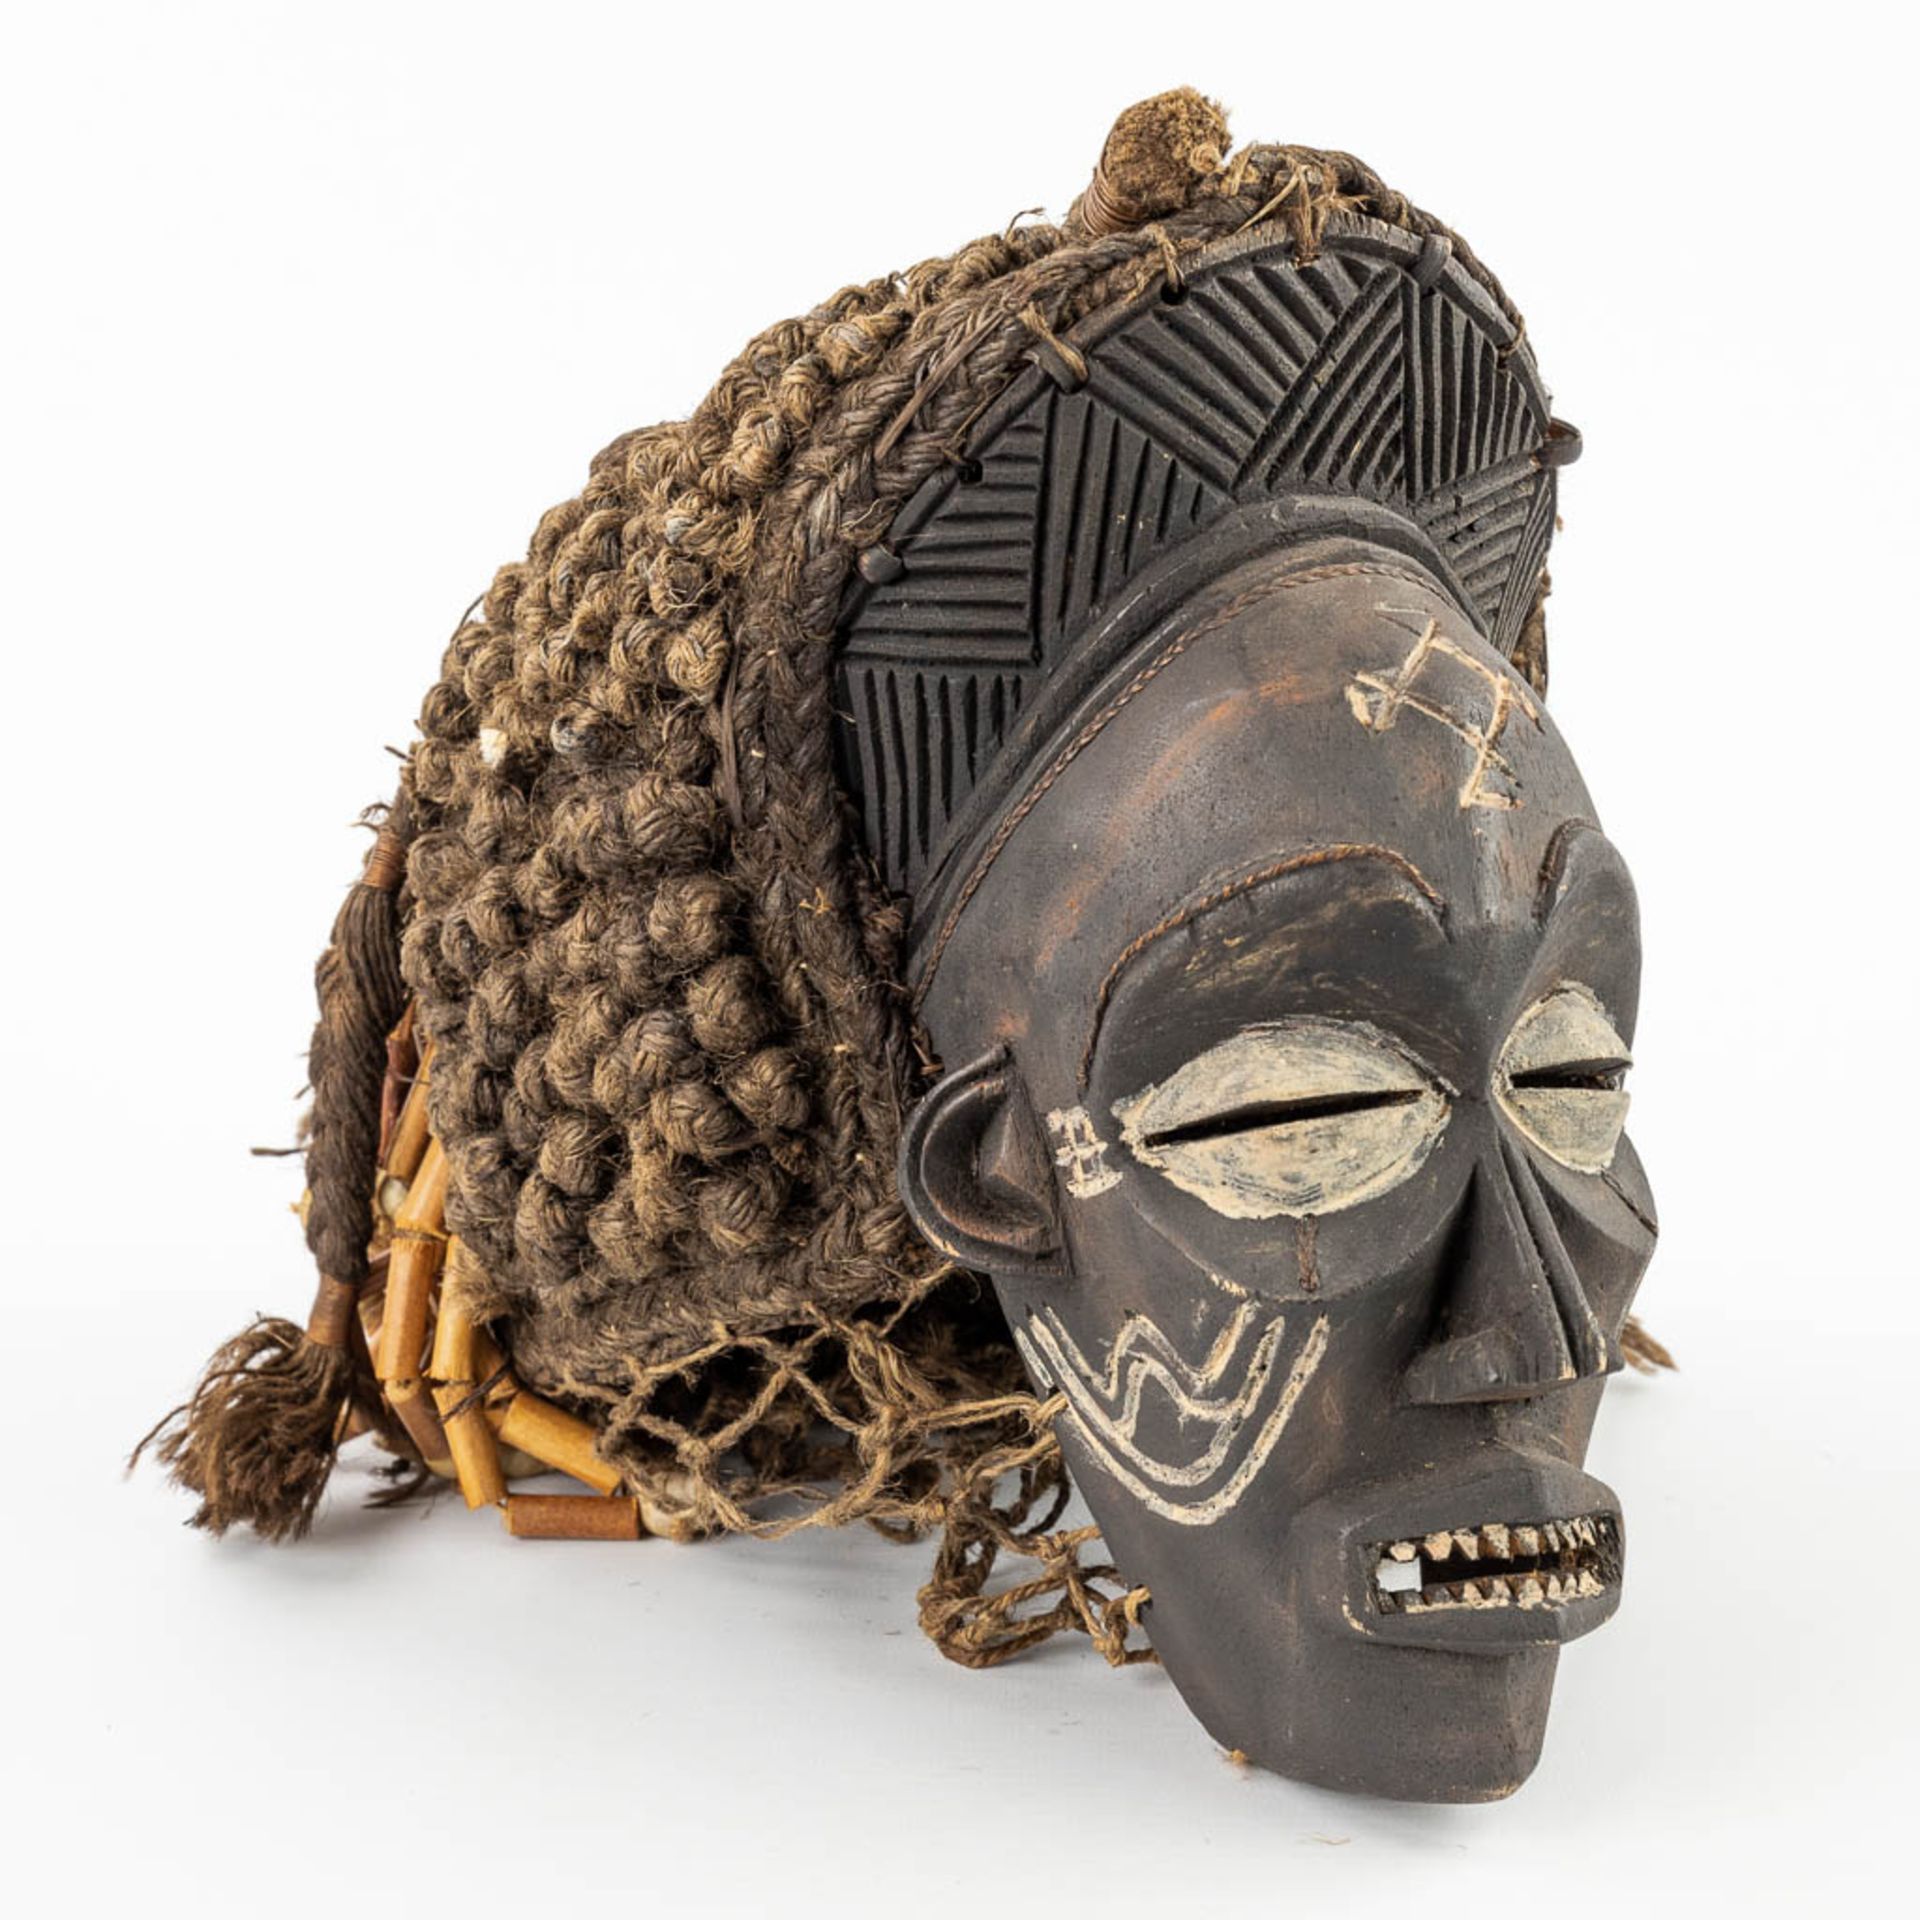 A collection of 2 African masks 'Chokwe' and 'Luba Songye'. (L: 13 x W: 24 x H: 43 cm) - Image 13 of 21